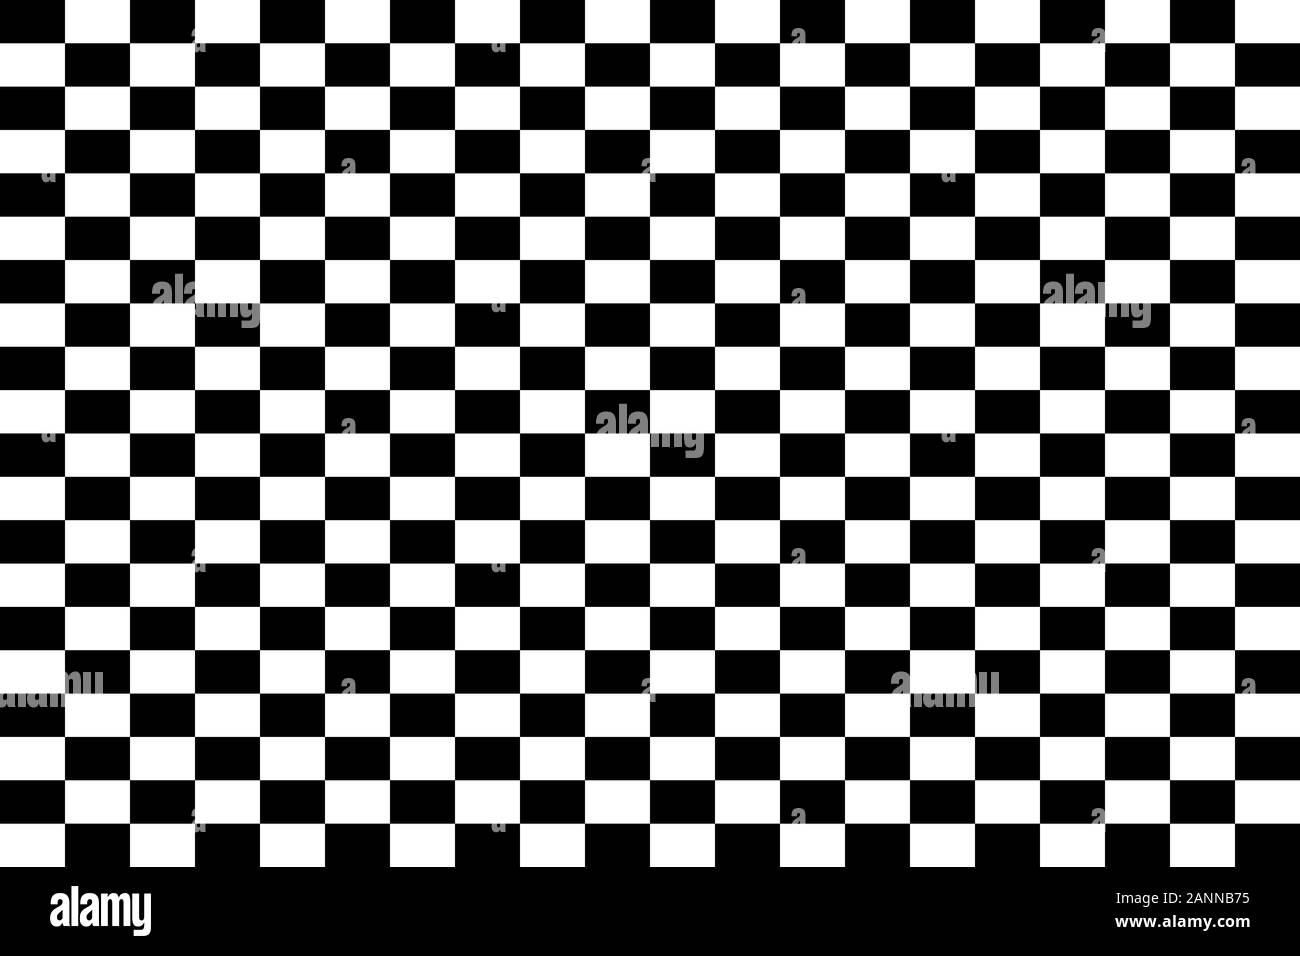 Black and white chess board - vector illustration.. Seamless pattern of black and white squares. Stock Vector